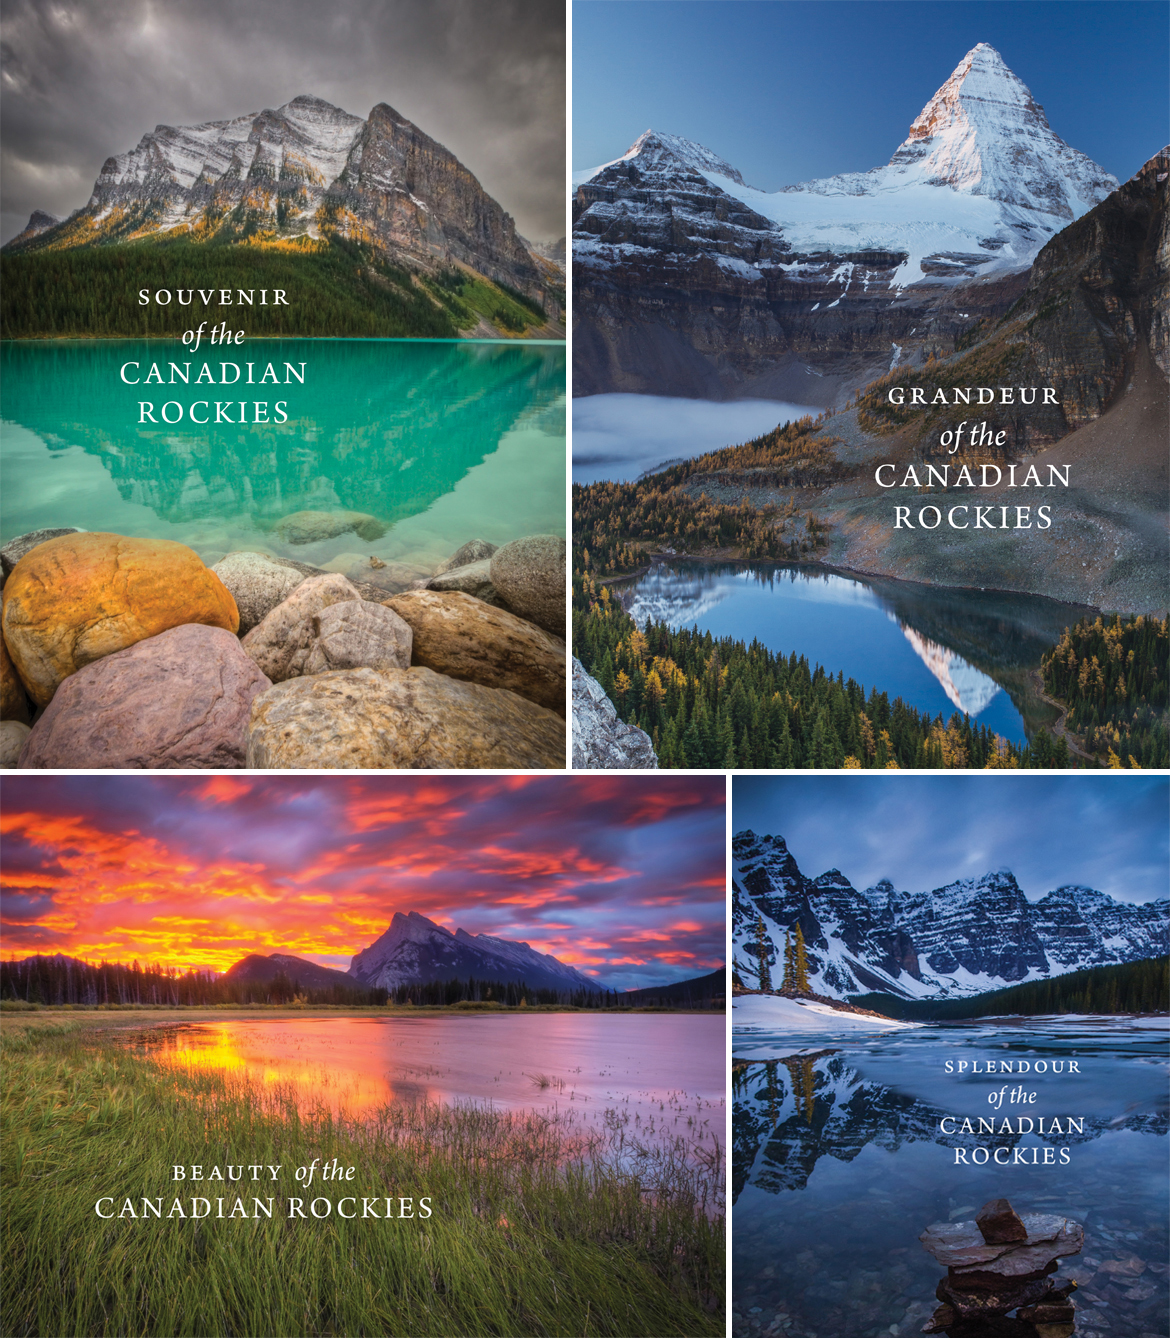 Four new books celebrate Canada's natural beauty